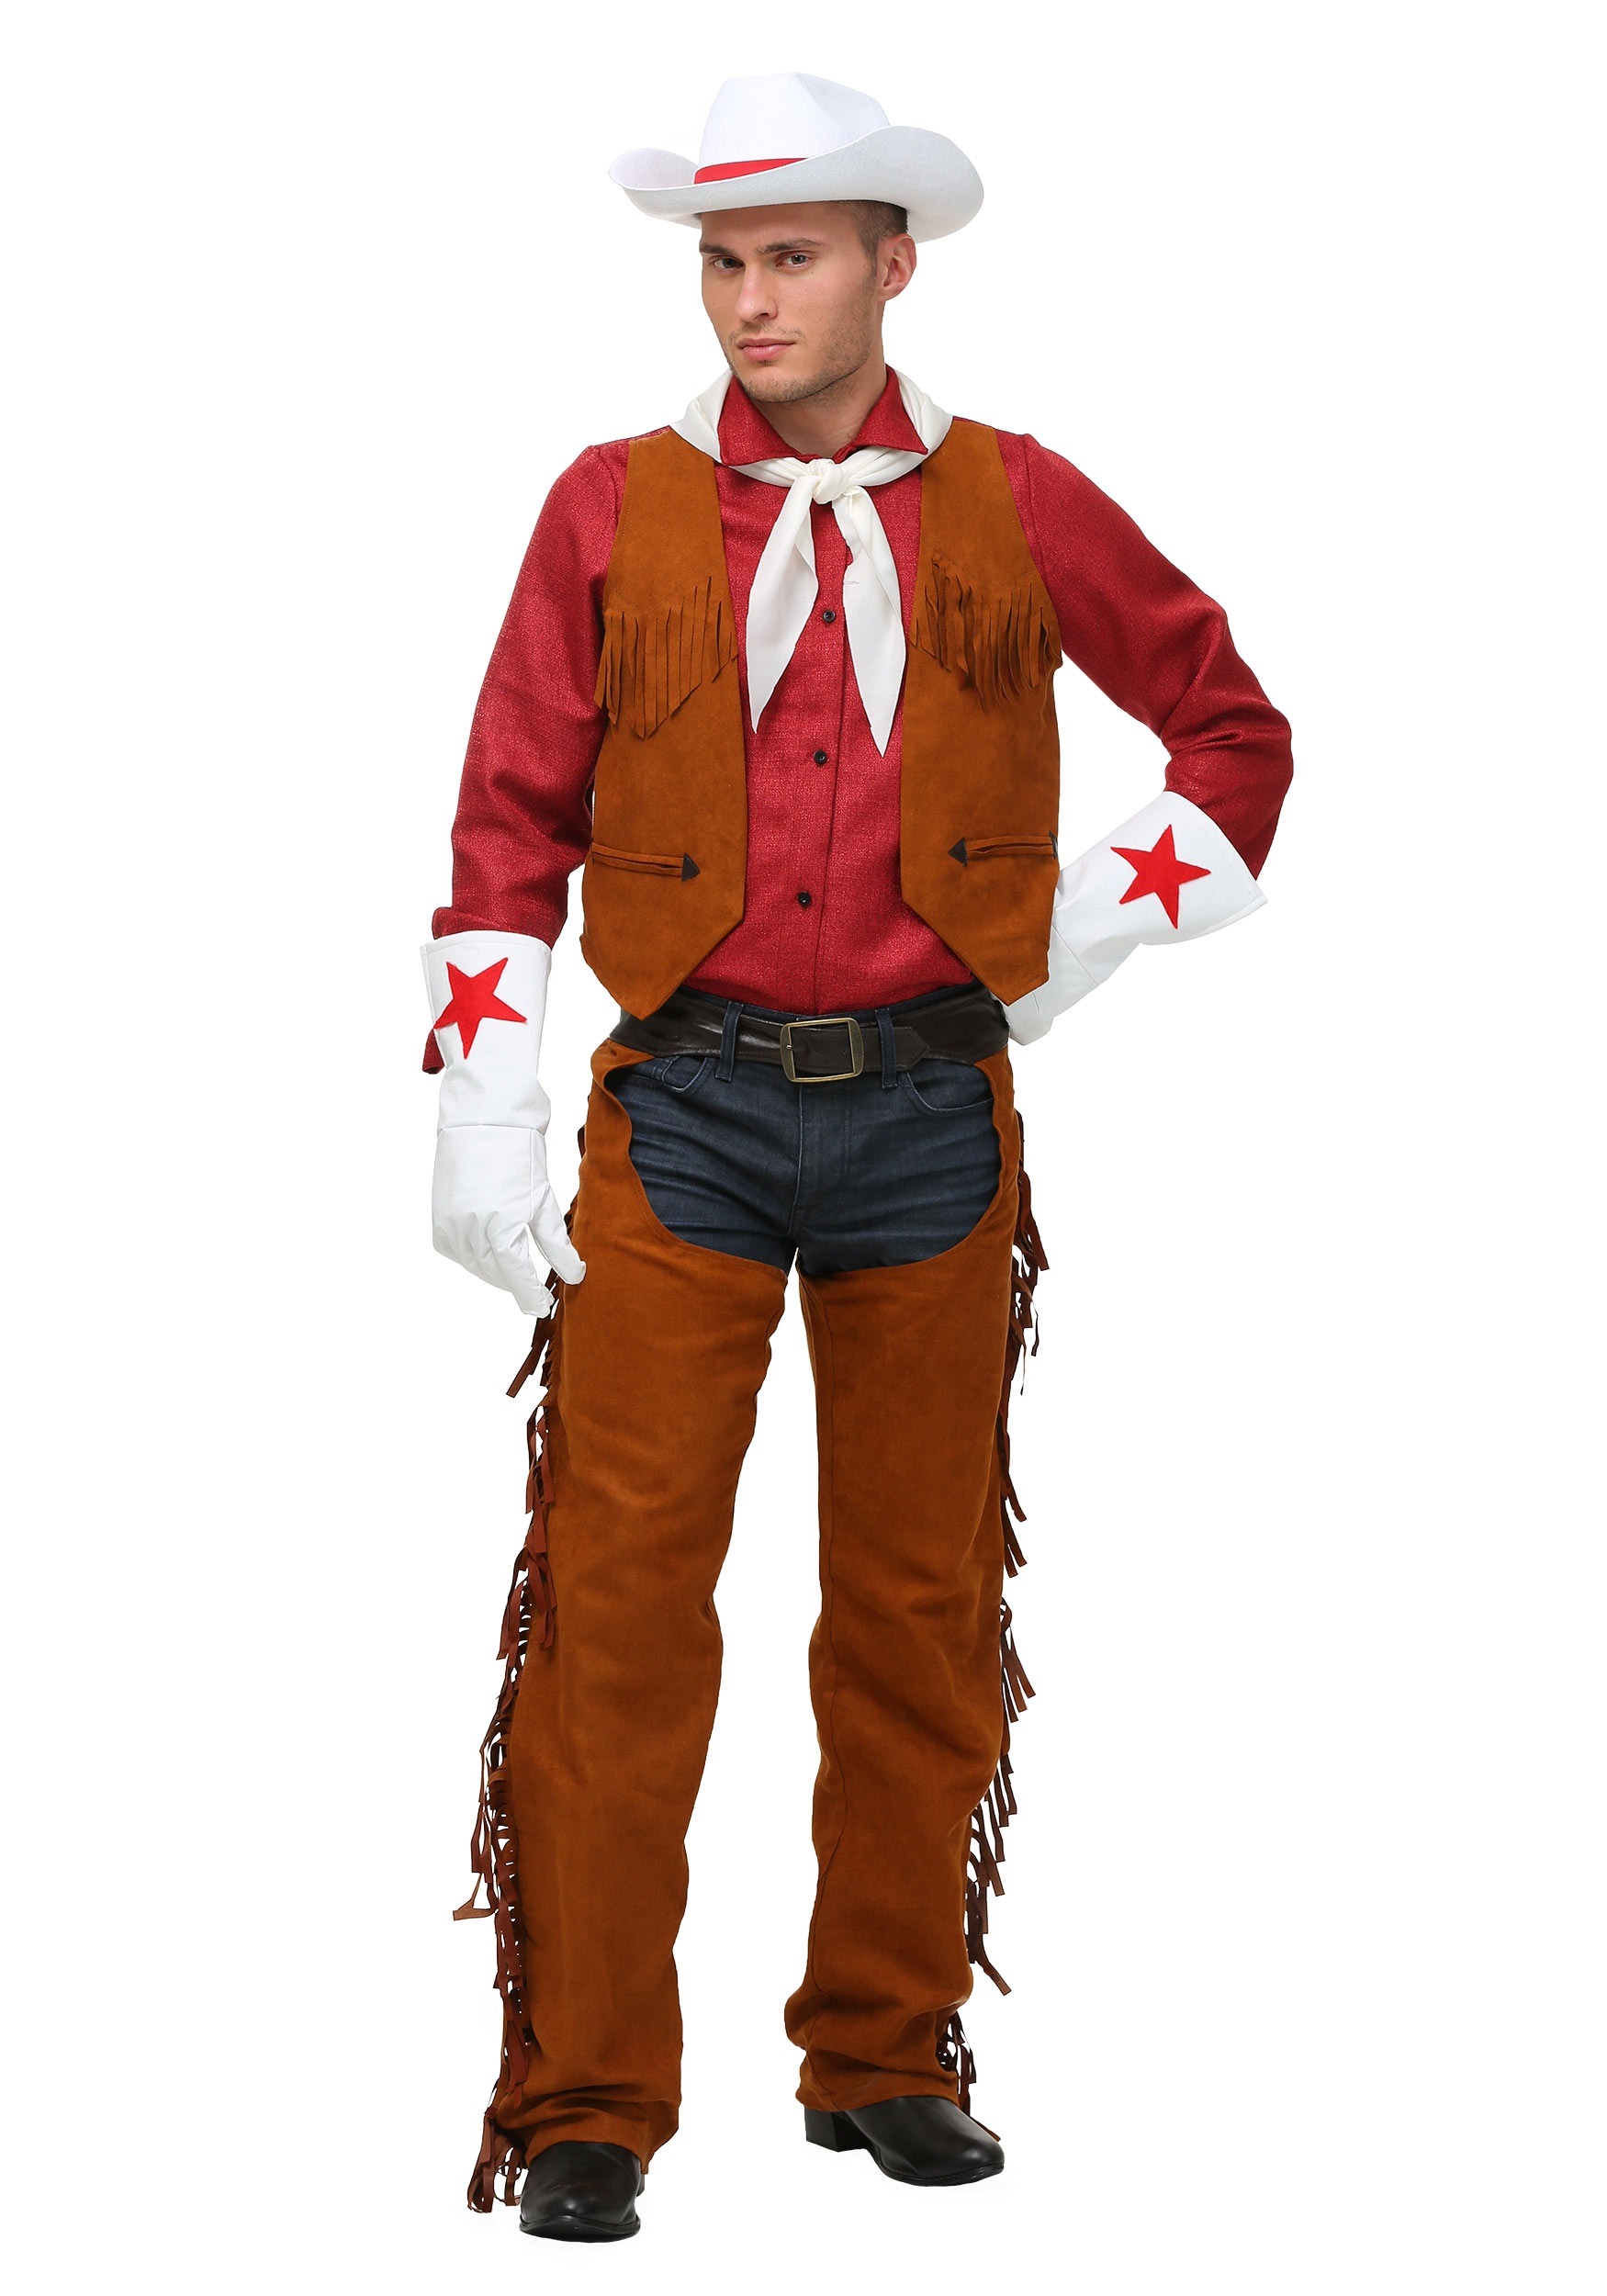 Photos - Fancy Dress FUN Costumes Exclusive Adult Rodeo Cowboy Costume Yellow/Red FUN2410AD